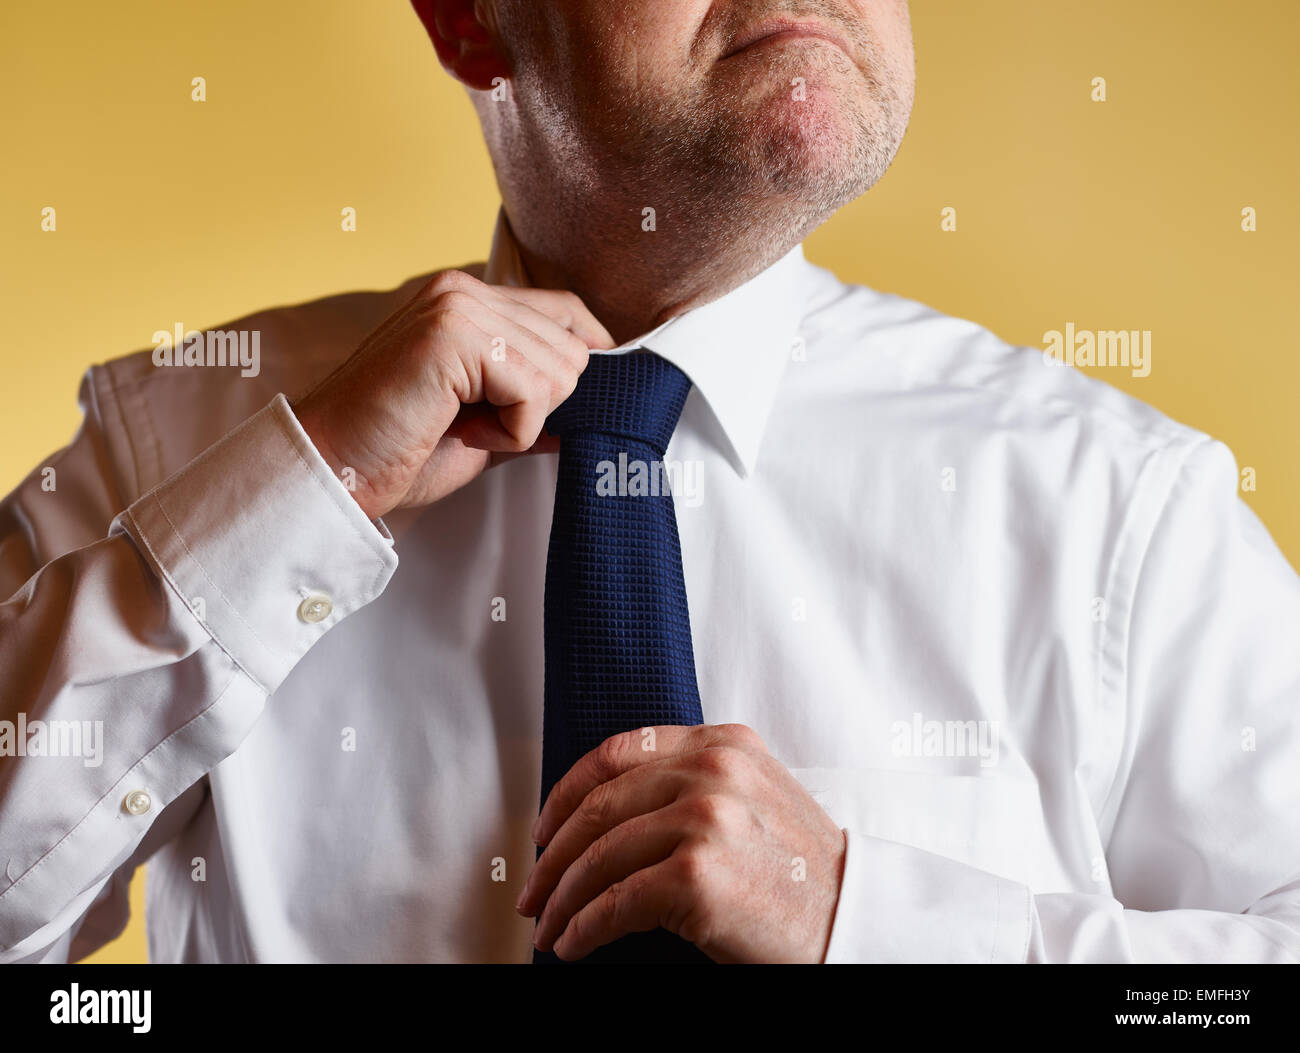 Close up, male wearing white shirt and blue tie, he loosen the tie knot, yellow background Stock Photo